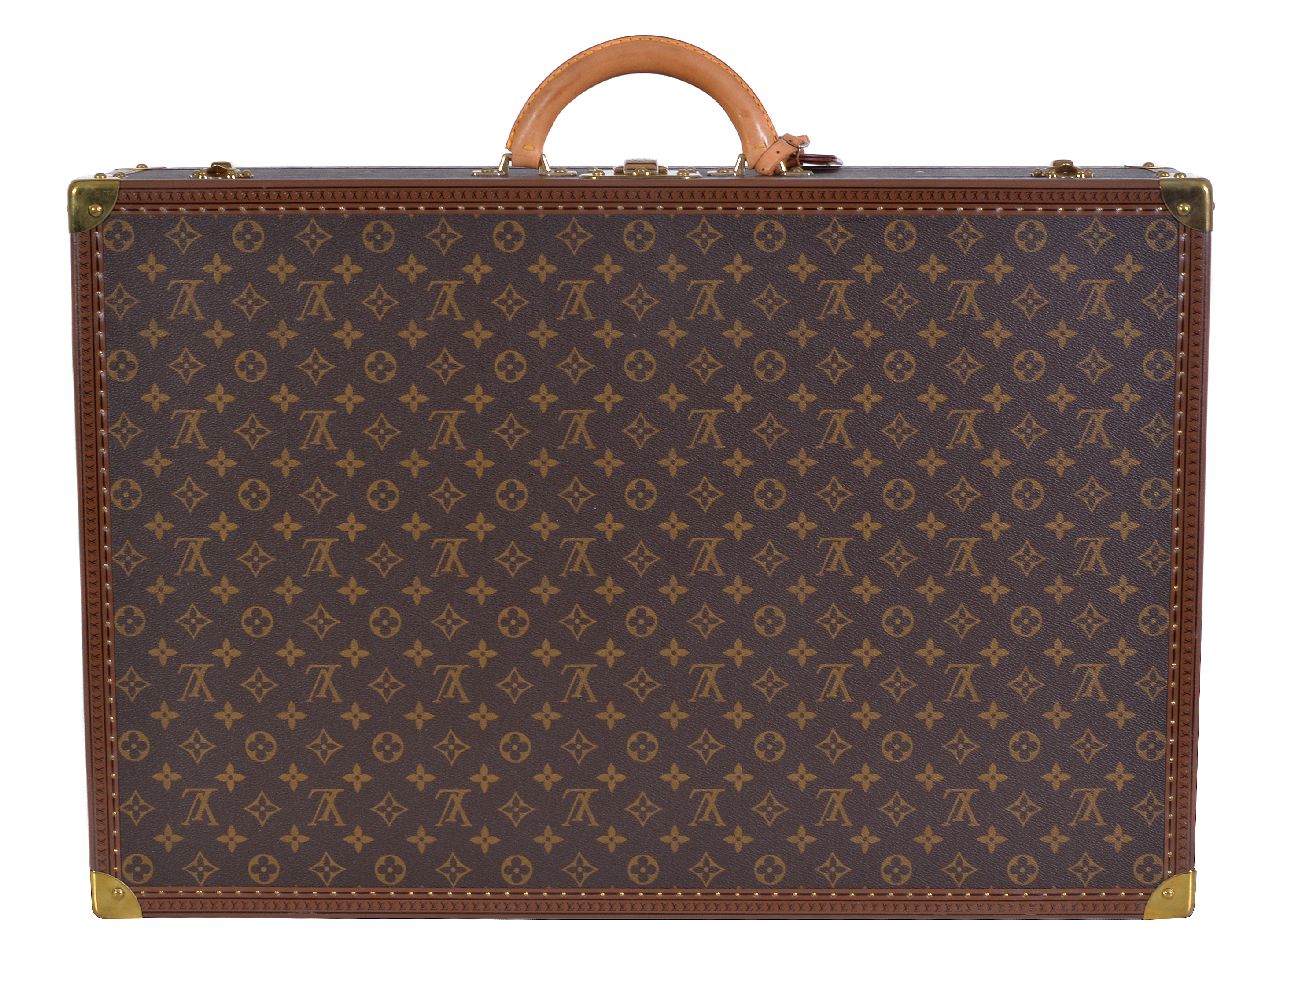 Louis Vuitton, Monogram, Bisten 70, a coated canvas and leather hard suitcase